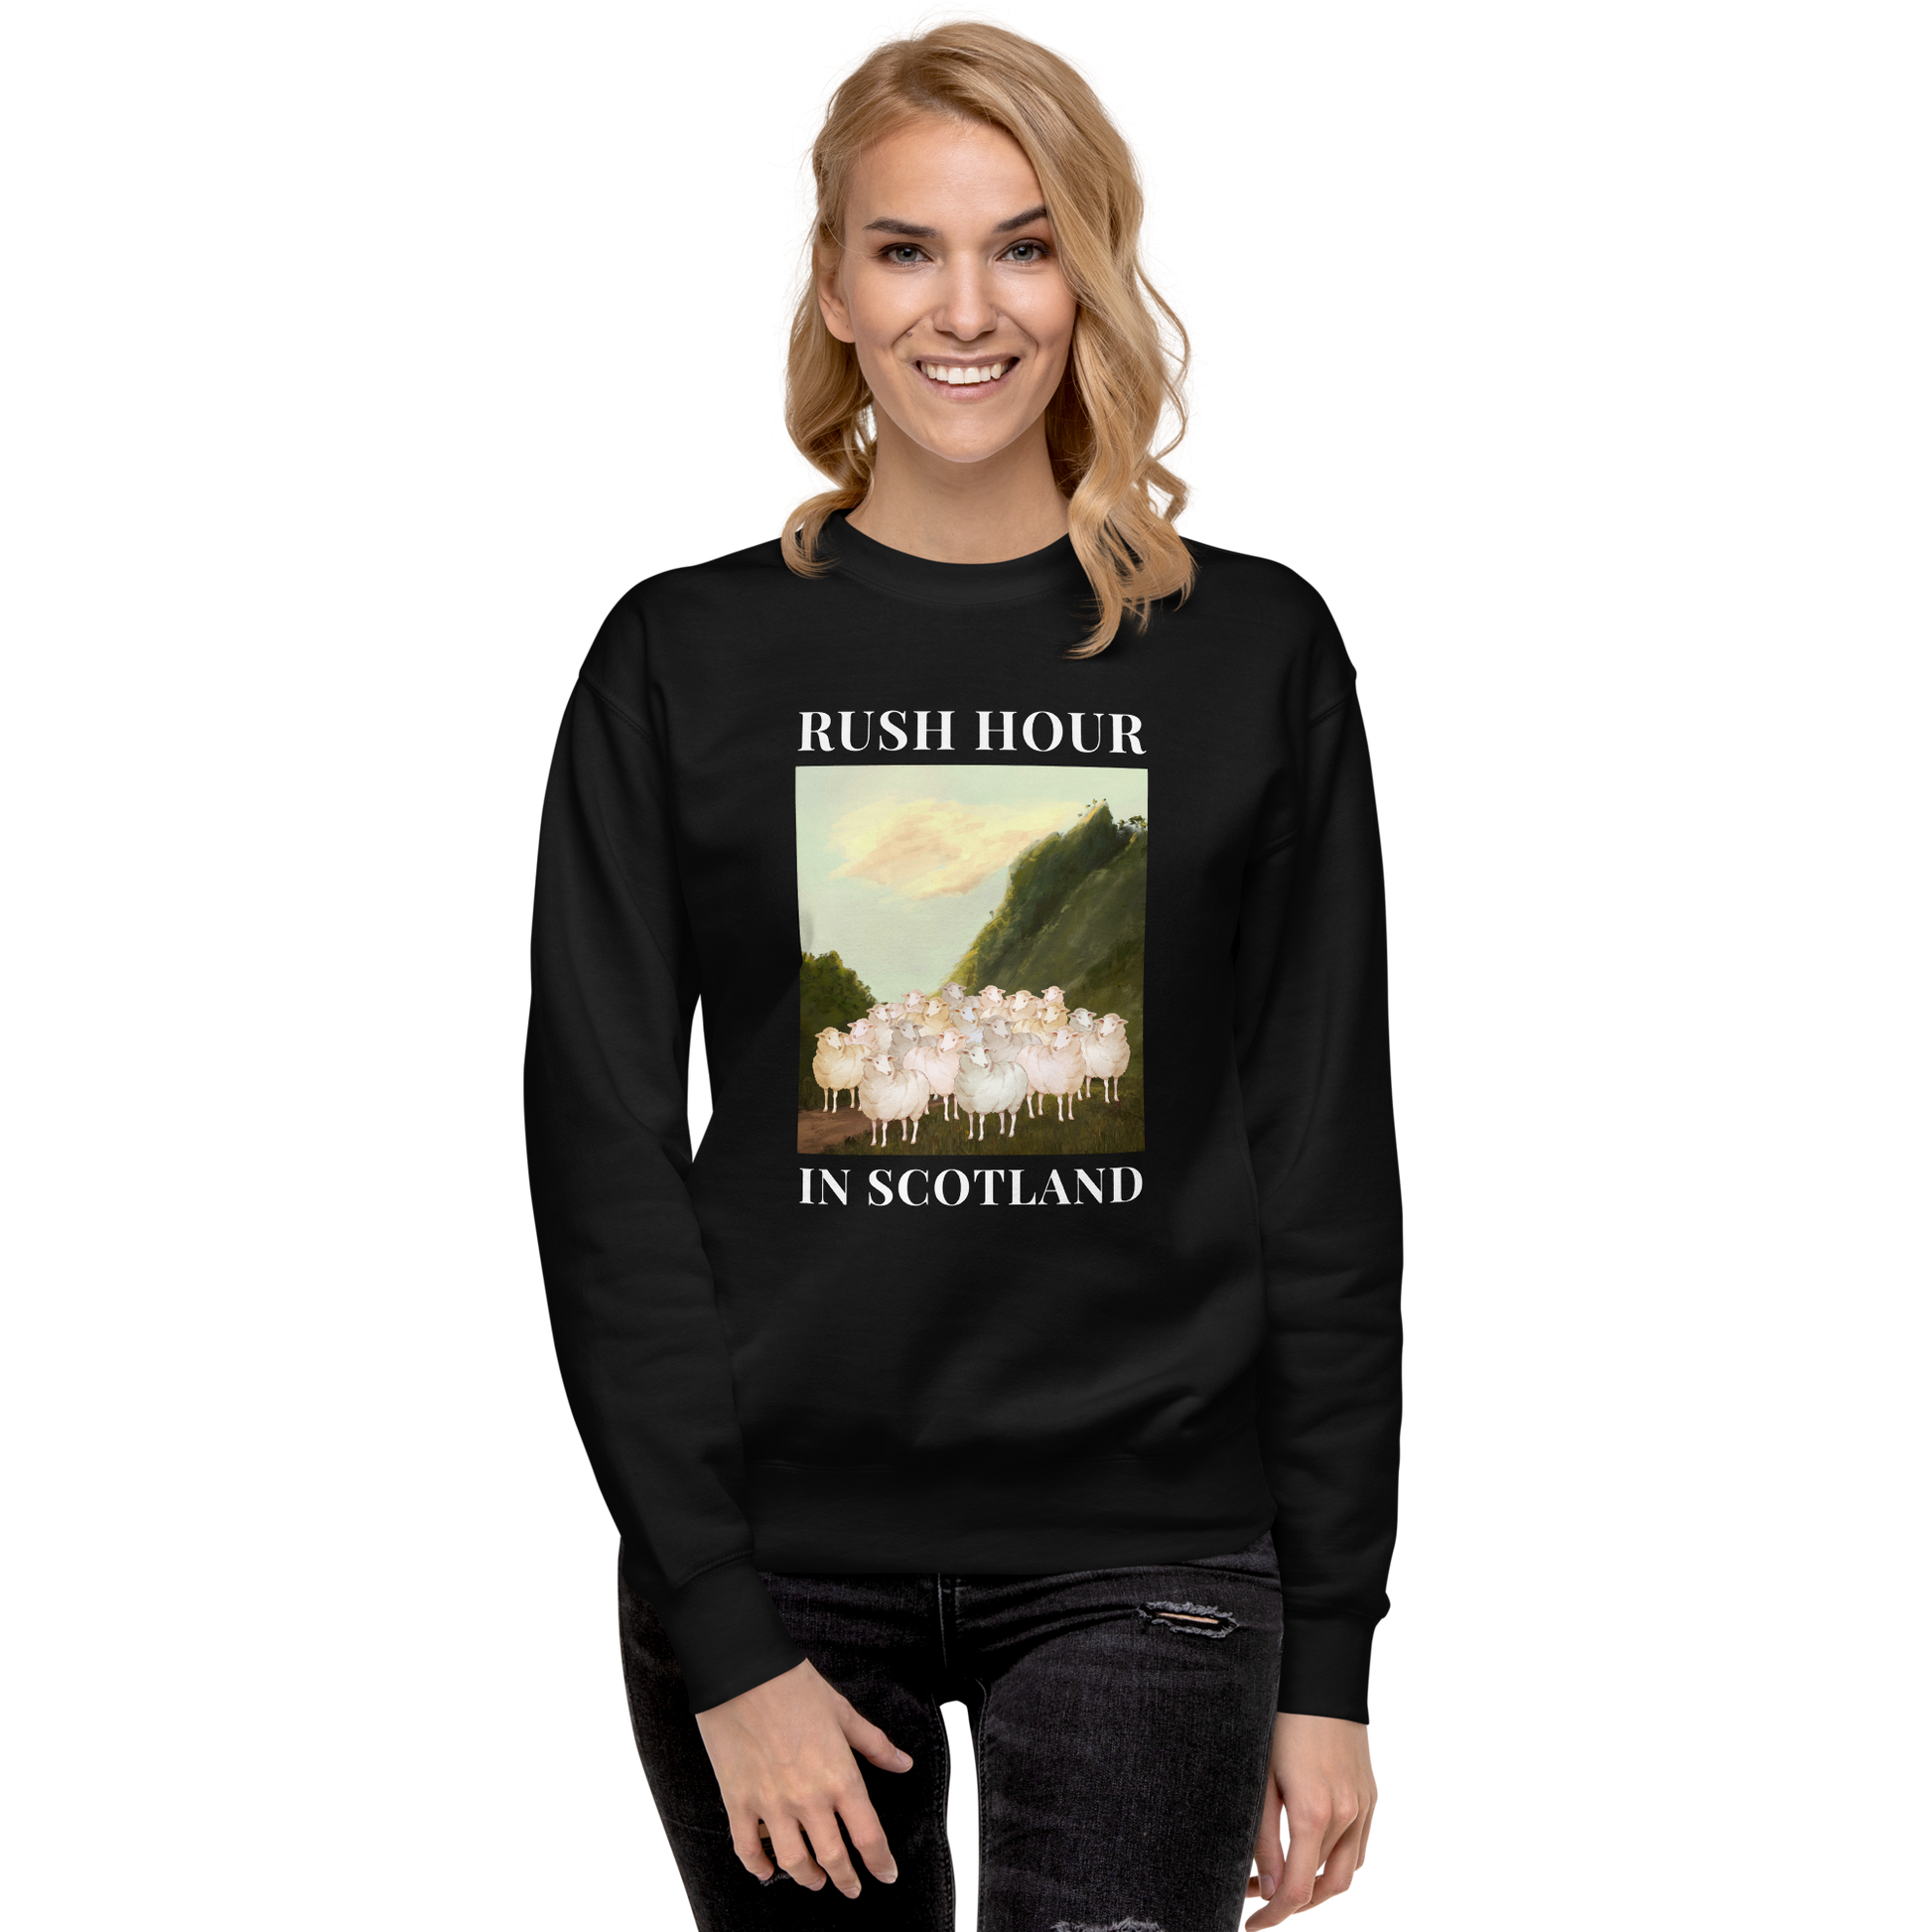 Woman wearing a Black Premium Sheep Sweatshirt featuring a comical Rush Hour In Scotland graphic on the chest - Artsy/Funny Graphic Sheep Sweatshirts - Boozy Fox